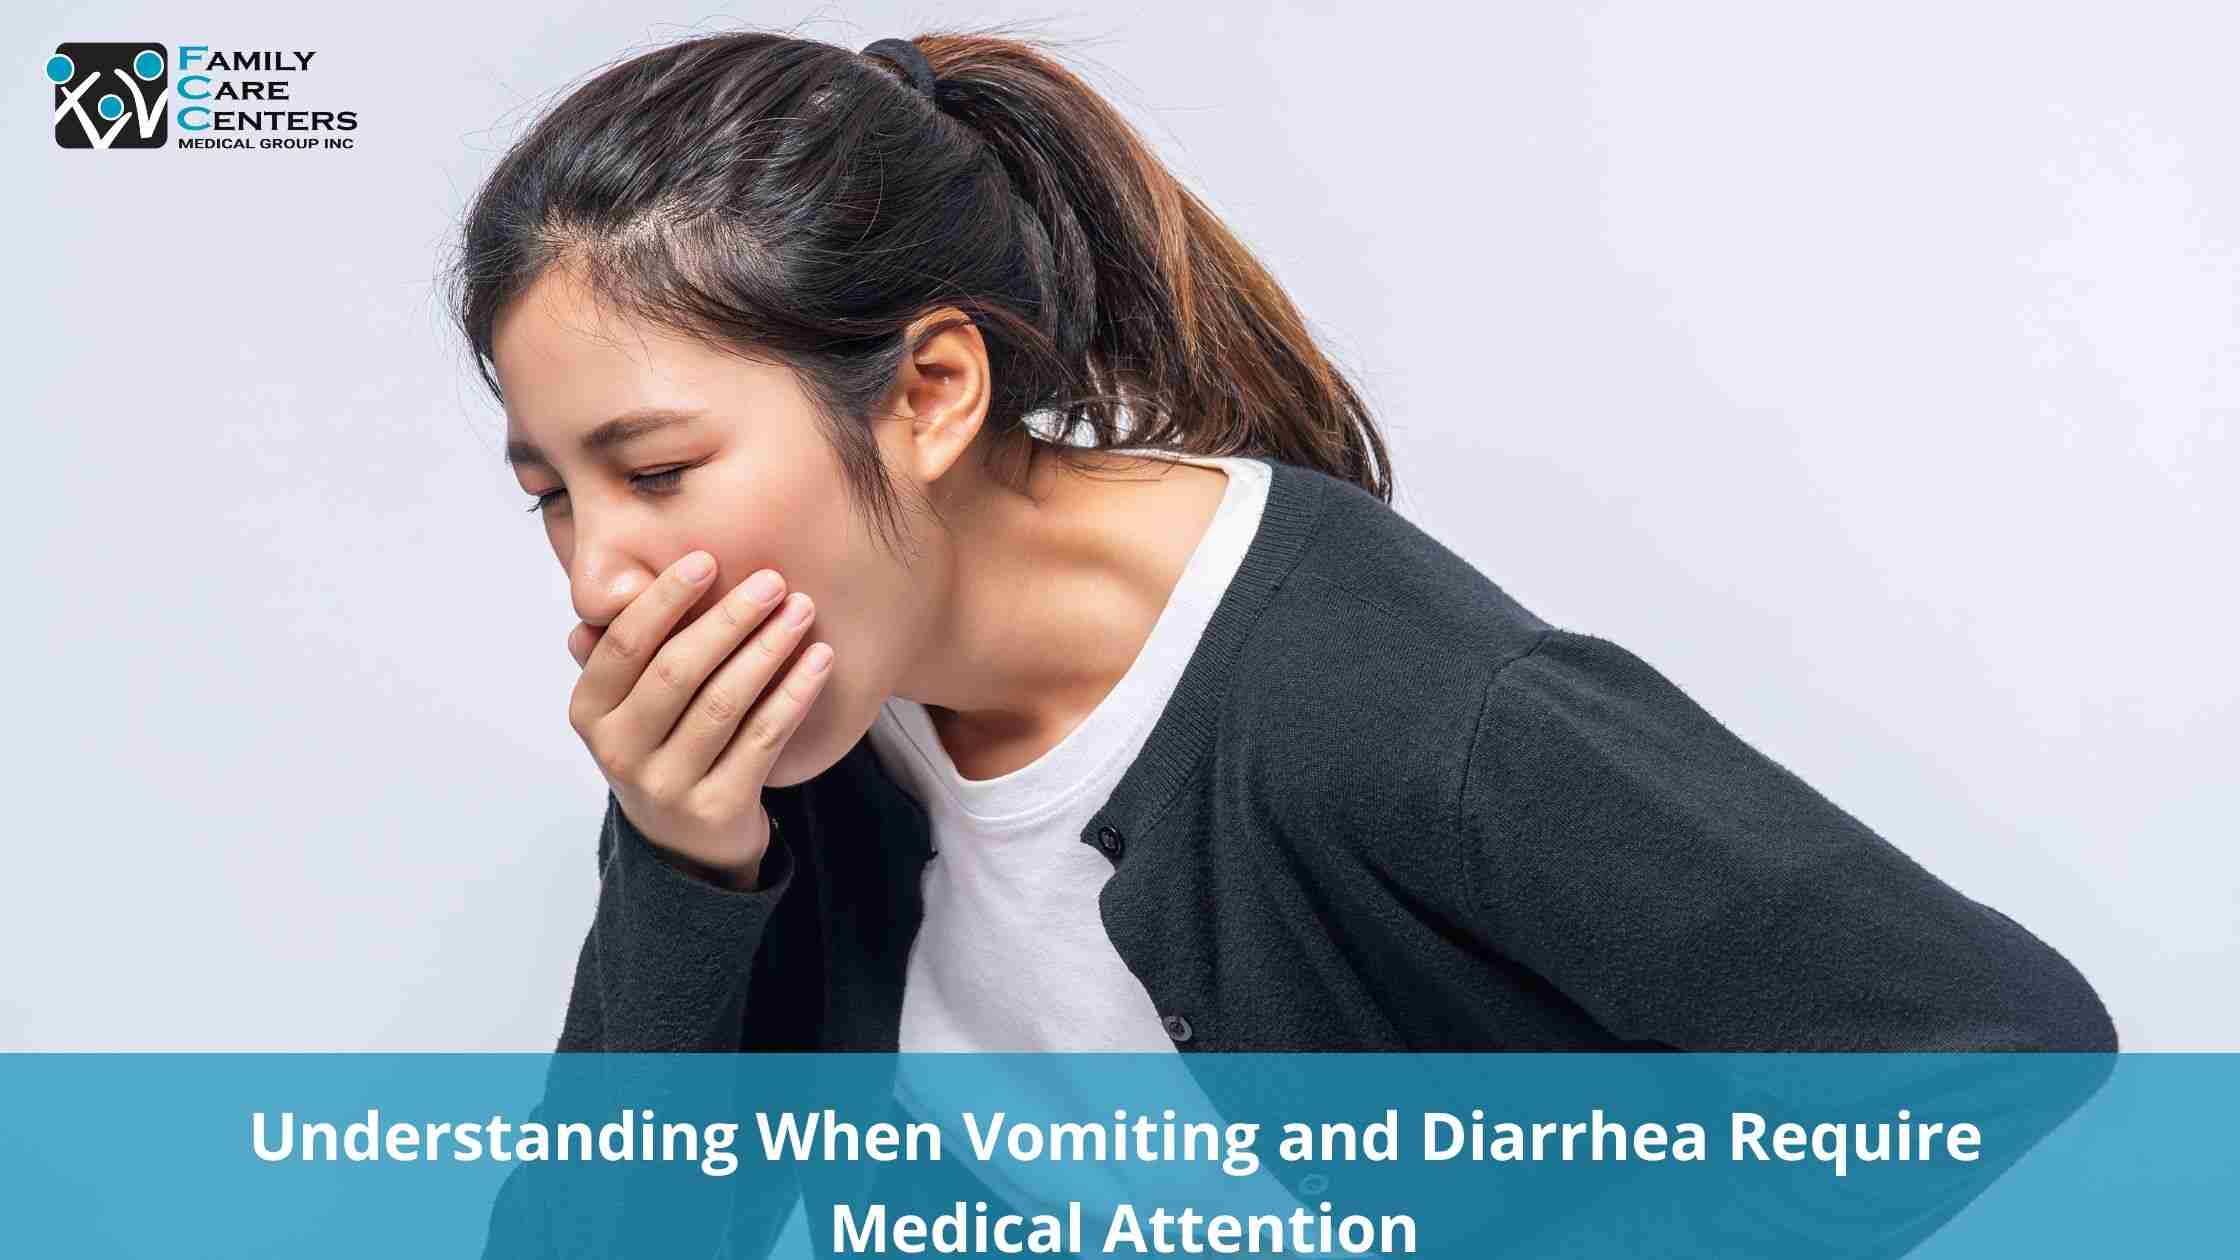 Medical attention for Vomiting and Diarrhea 